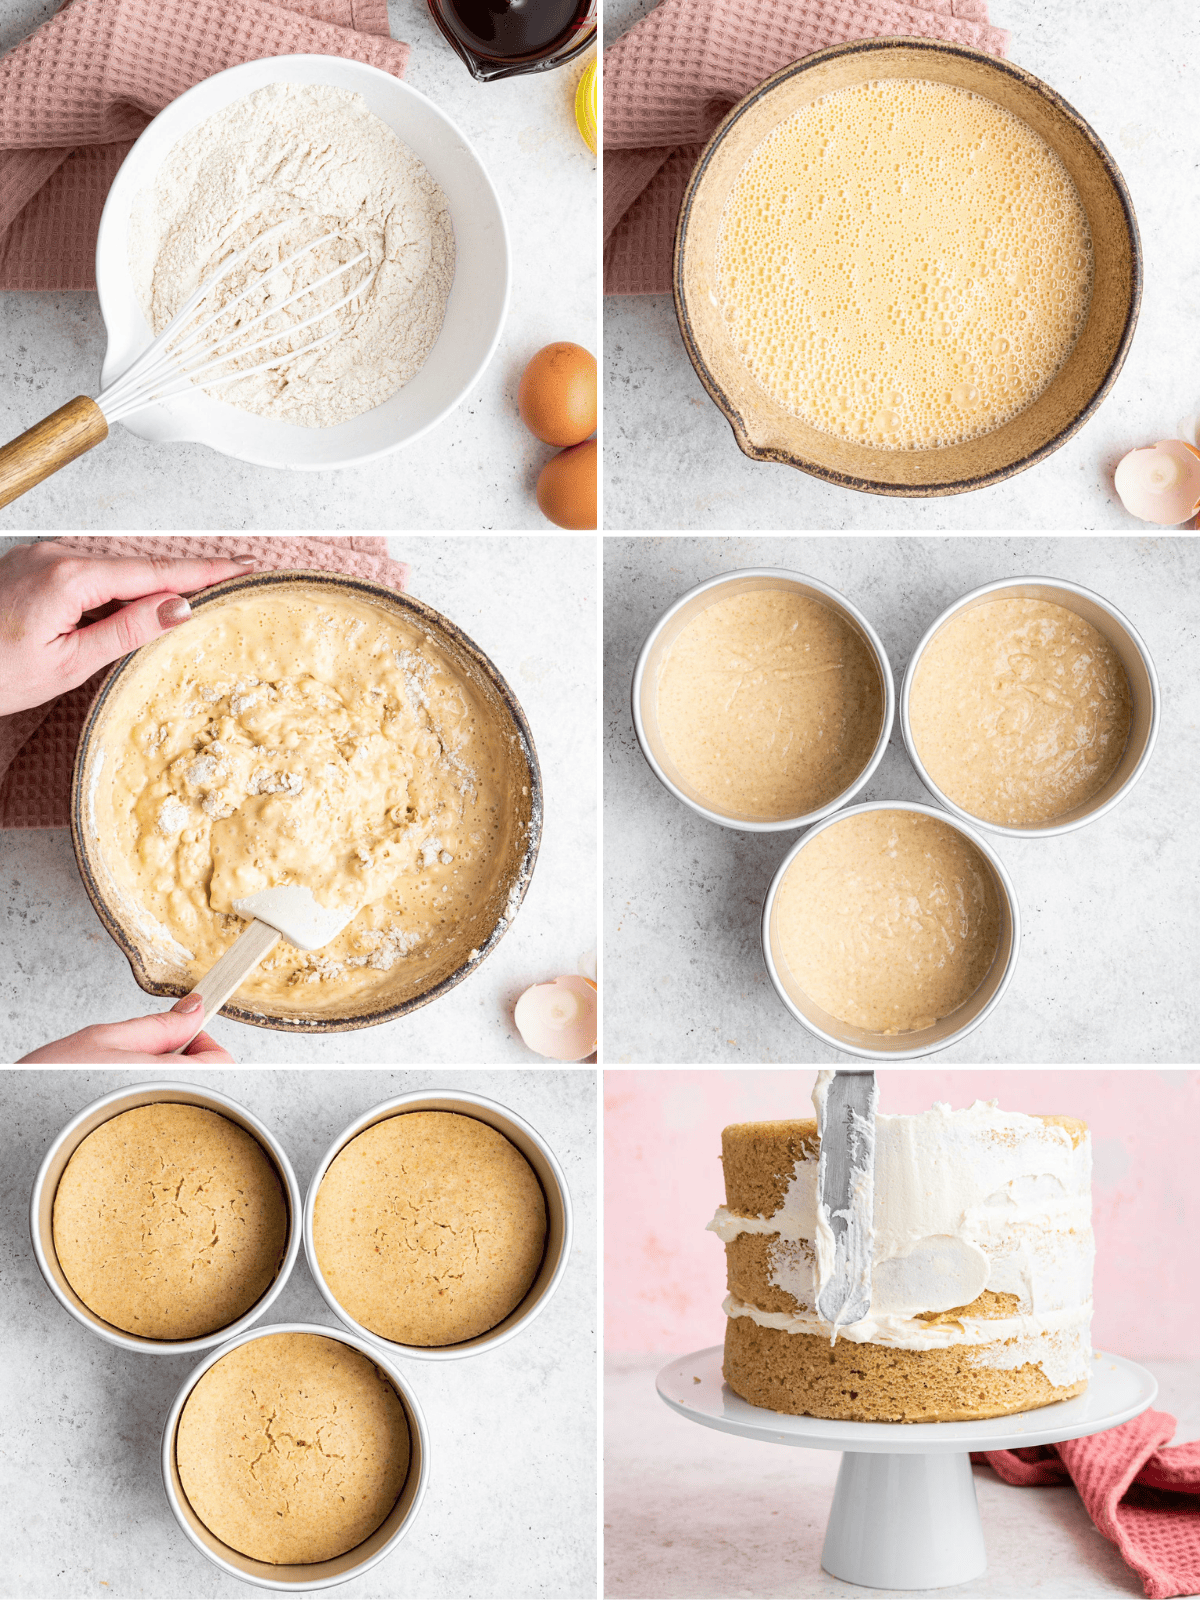 6 photo collage showing how to make the healthy vanilla cake.